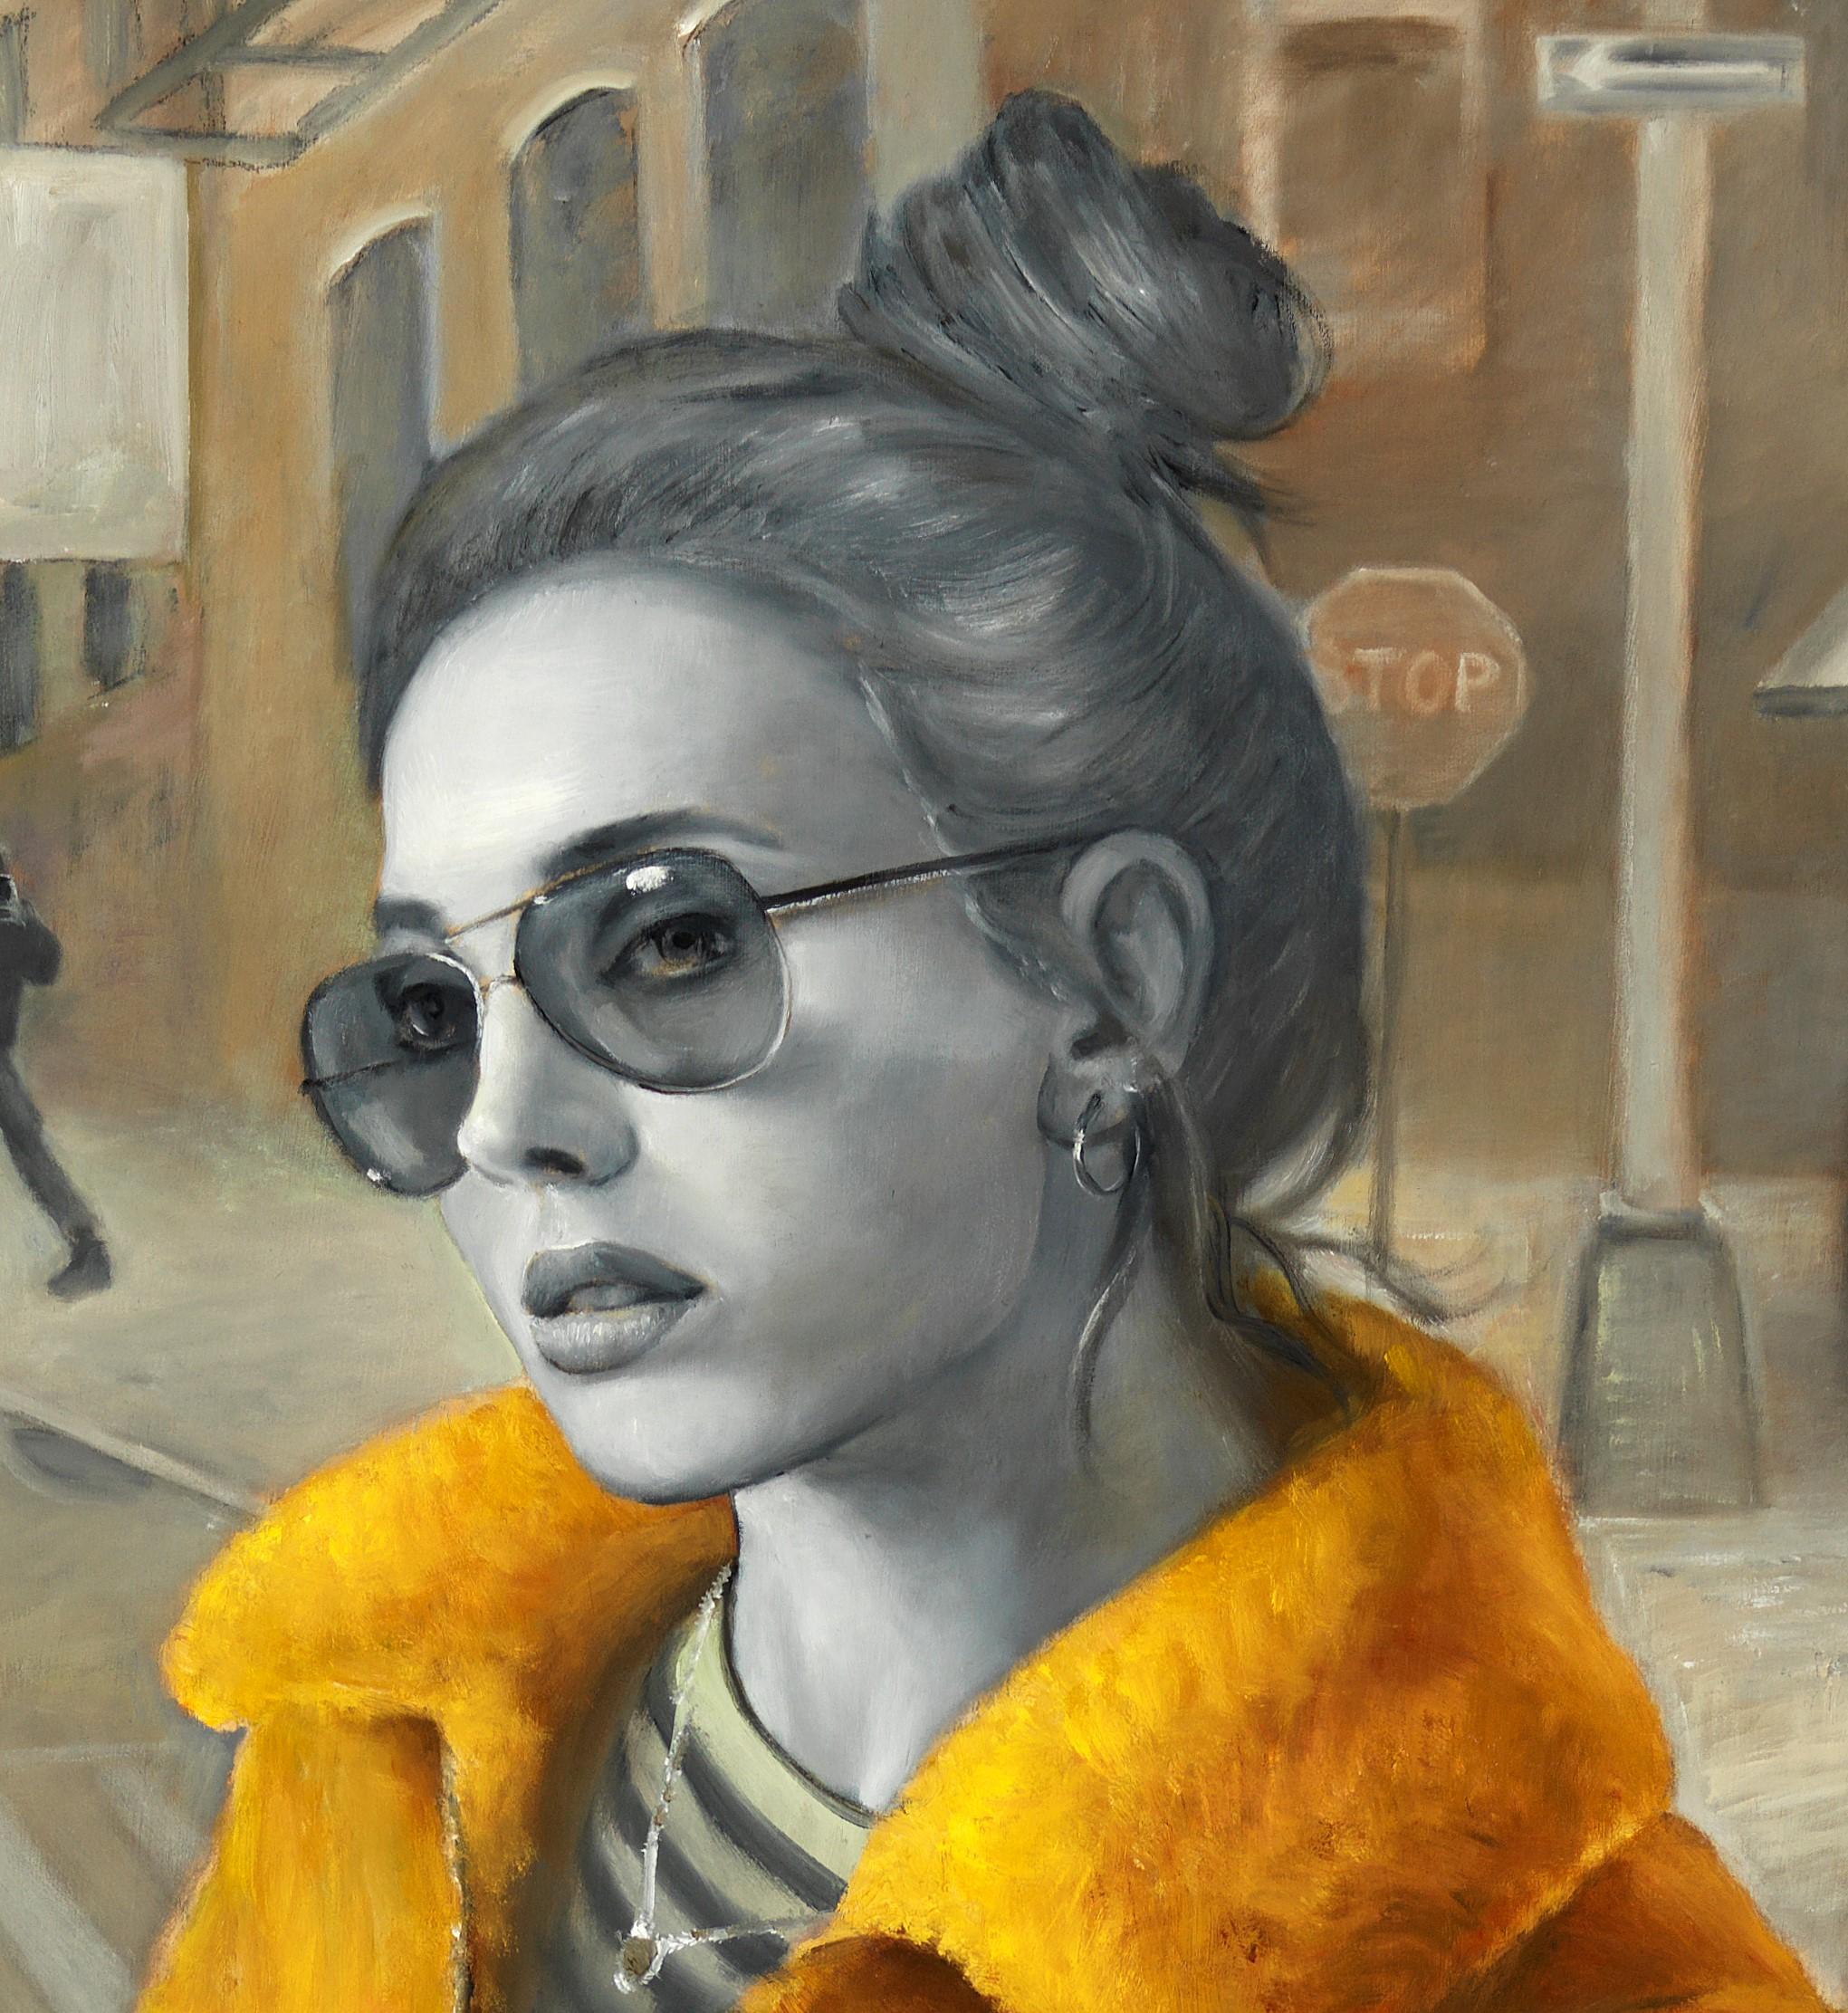 Separate Worlds of Reality, Woman Wearing a Bright Yellow Coat, Urban Setting - Painting by Bruno Surdo